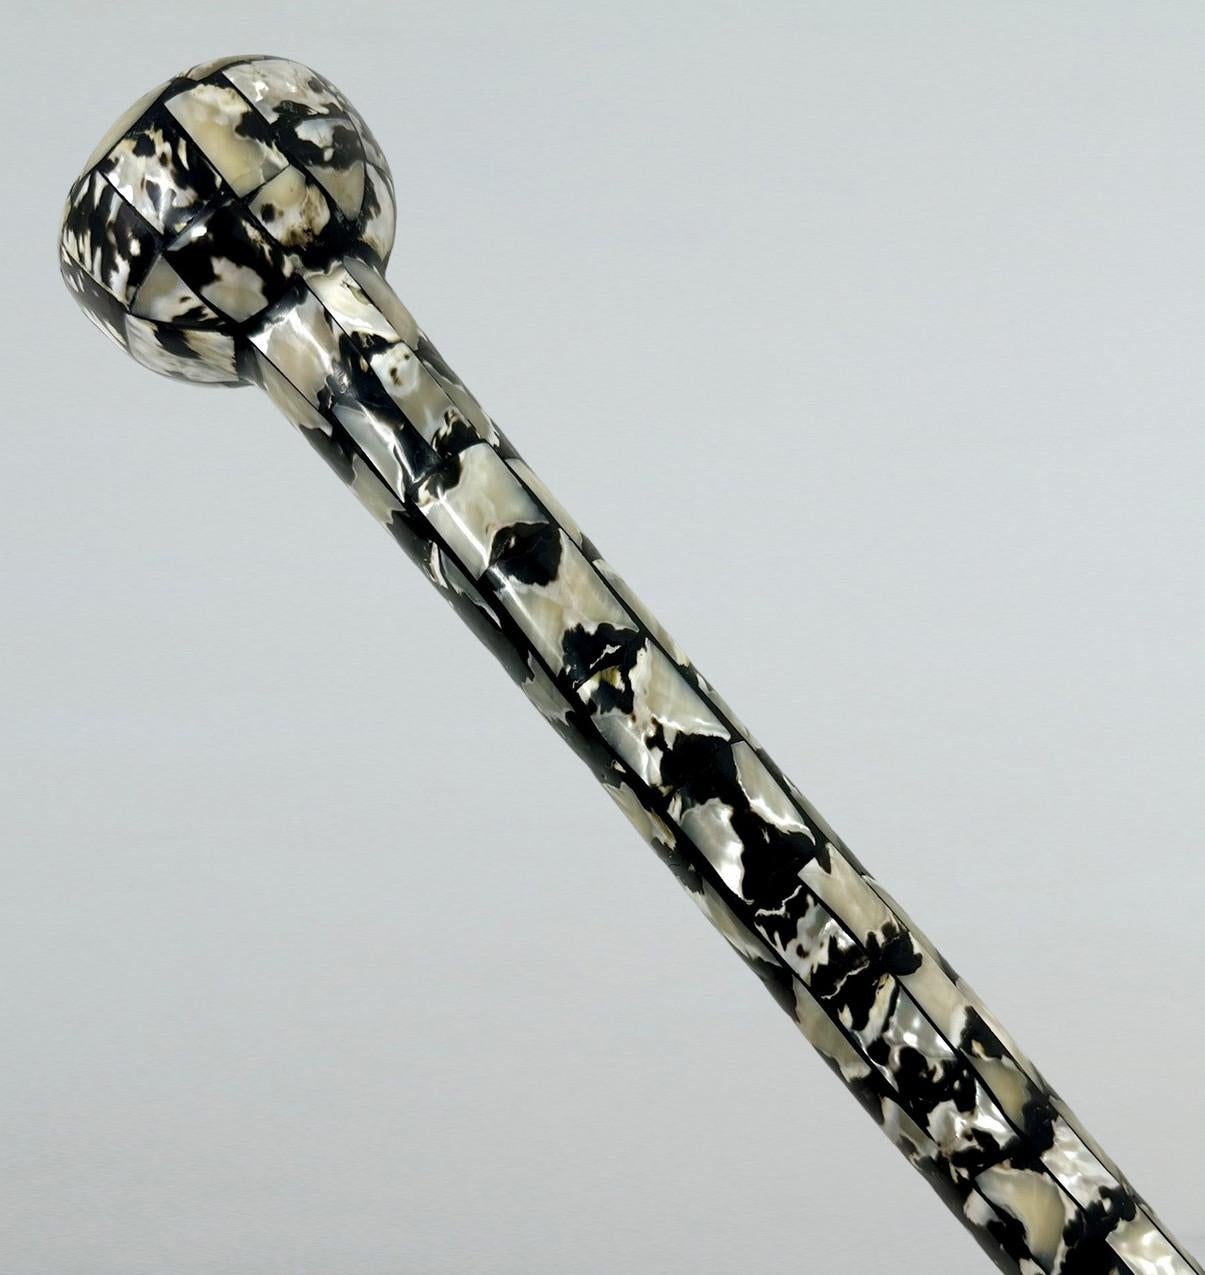 Vintage Lady's Gentleman's Mother of Pearl Traveling Walking Swagger Stick Cane  In Good Condition For Sale In Dublin, Ireland